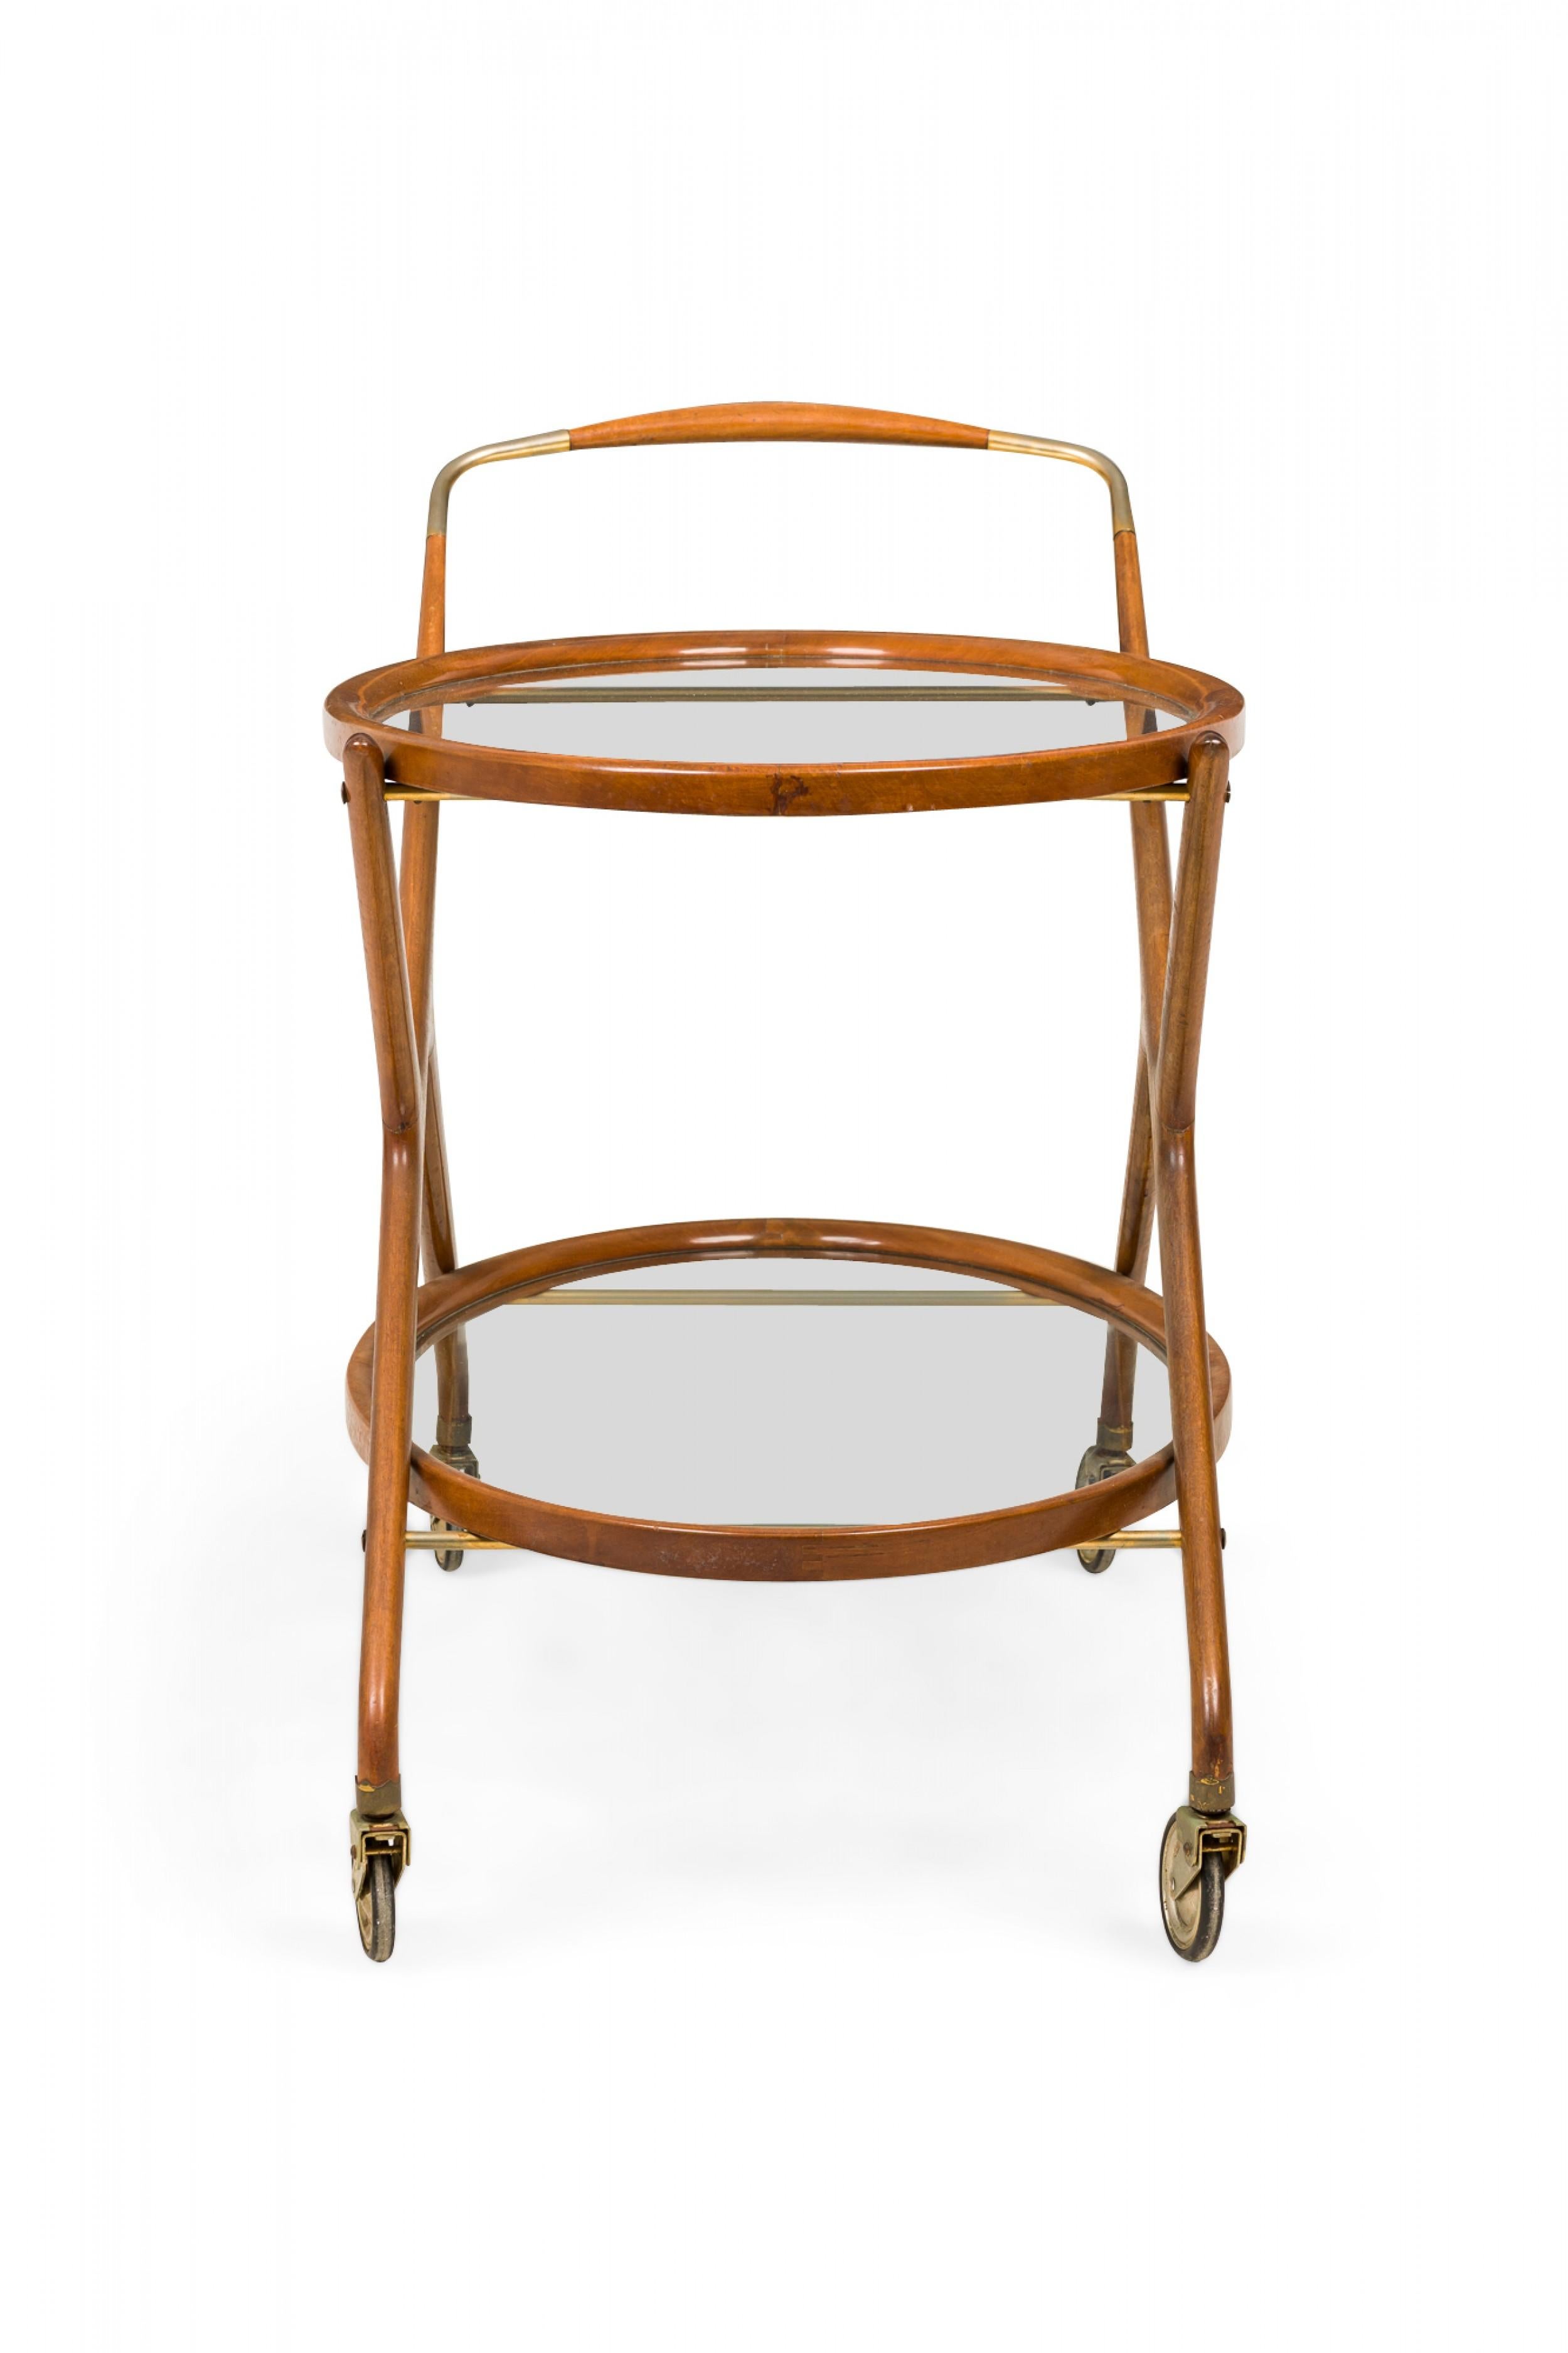 Italian Mid-Century oval form serving trolley / tea cart with a teak frame, two inset glass shelves, and a brass handle and support rods, resting on four casters. (CESARE LACCA).